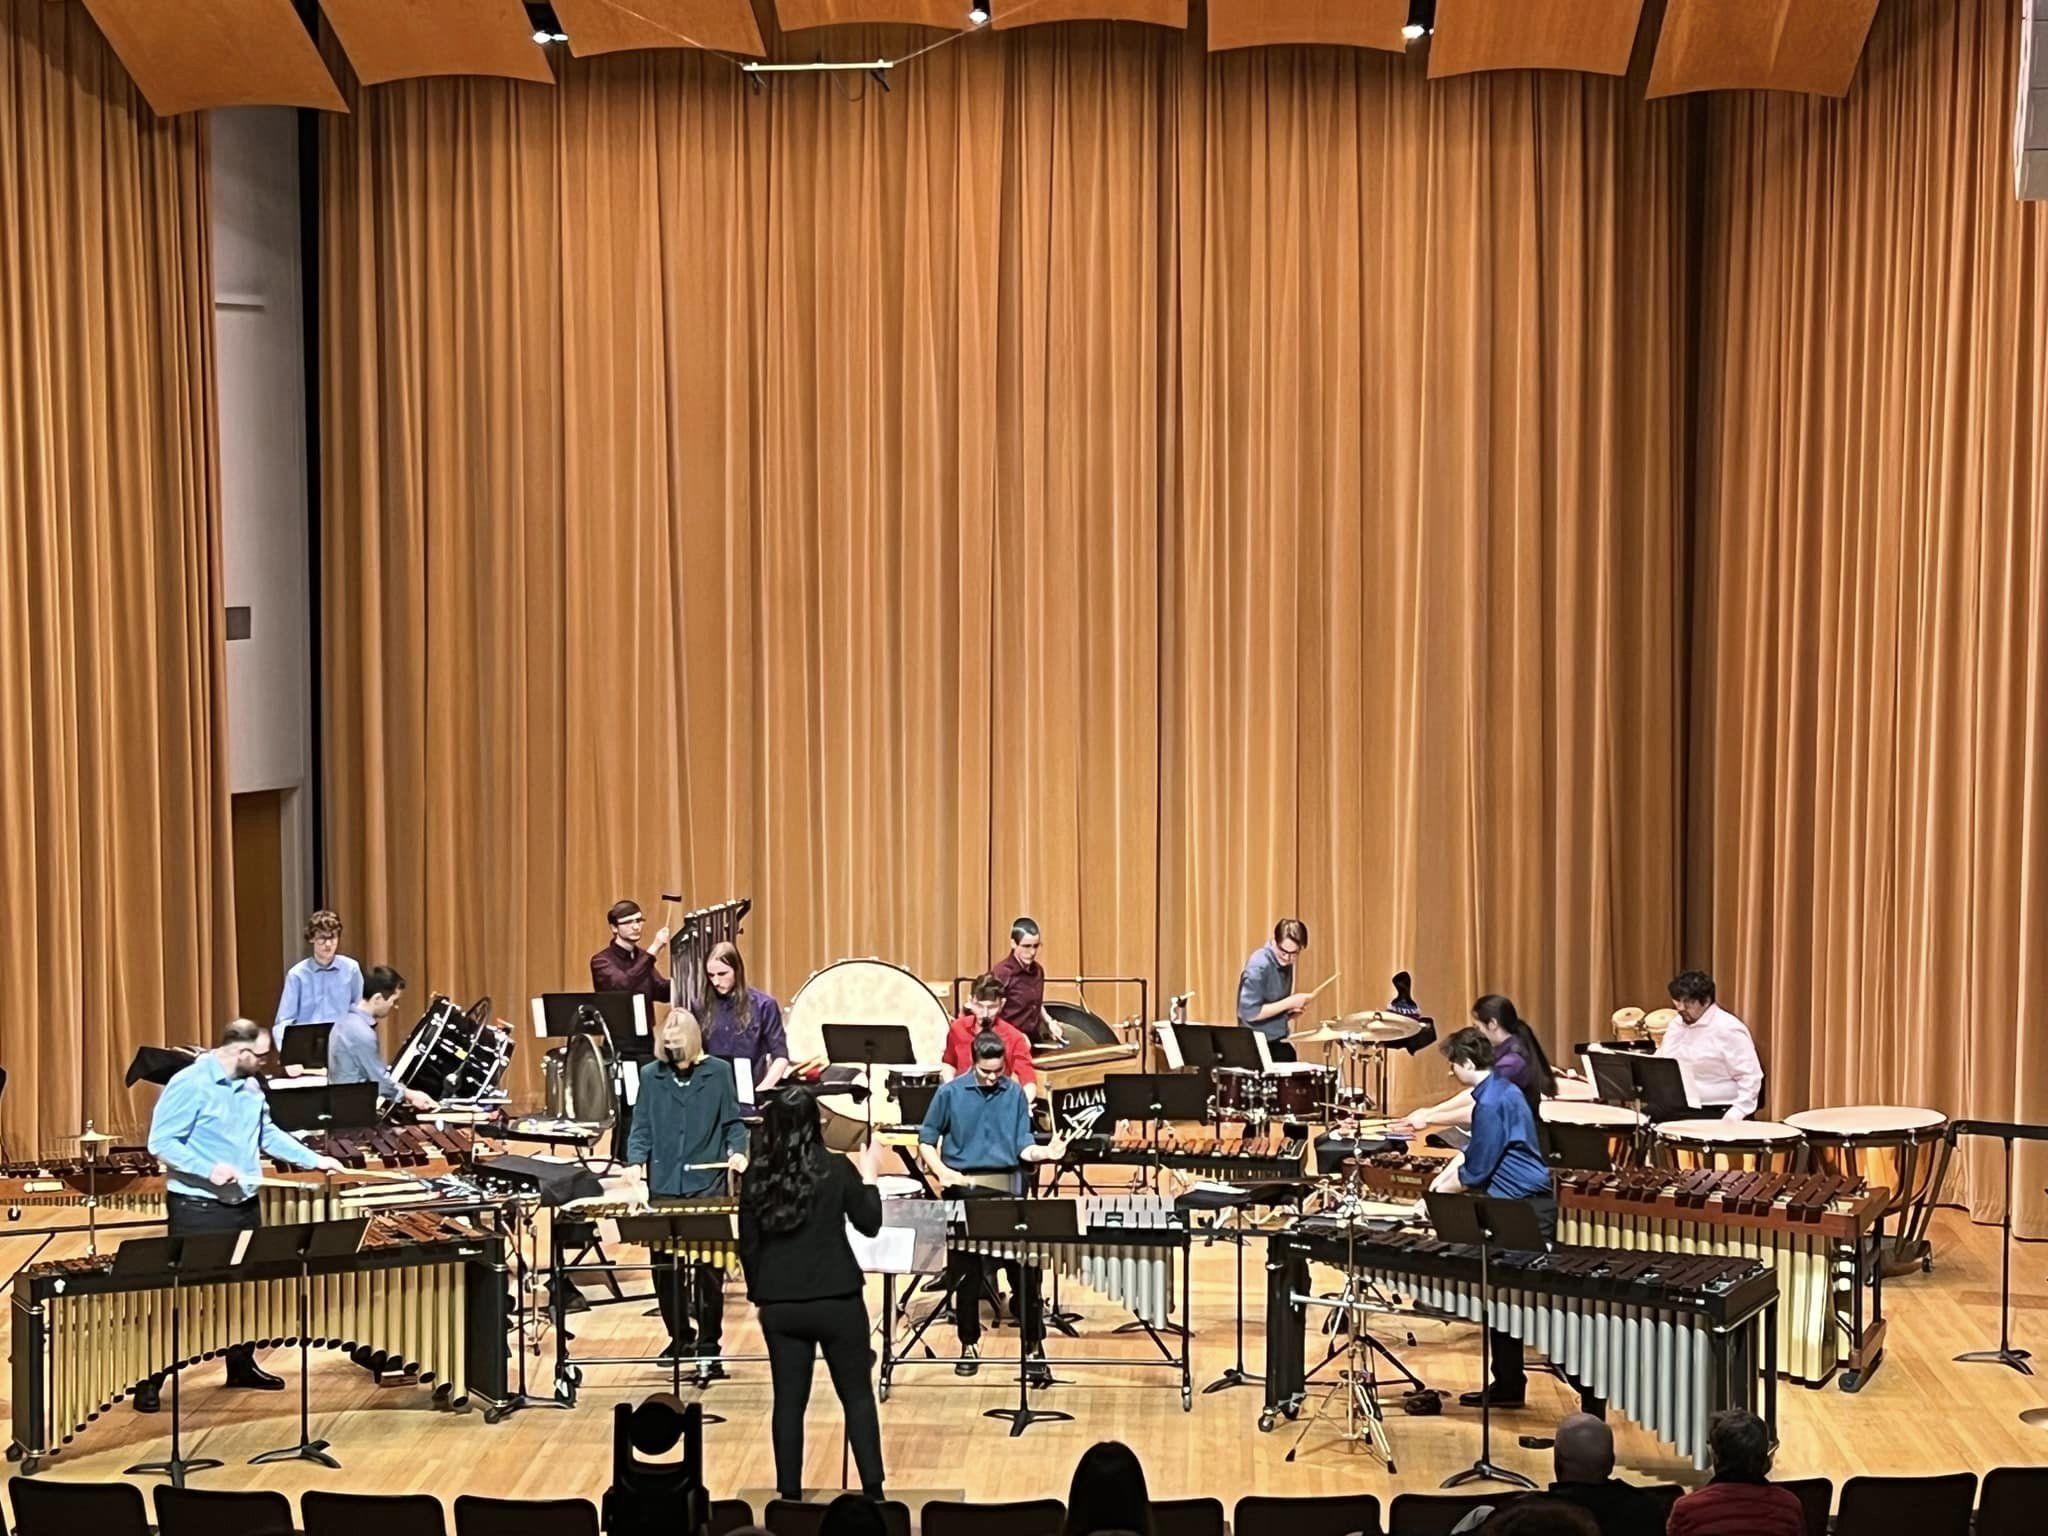 a dozen percussionists on stage surrounded by marimbas, drums, and all manner of percussion instruments.